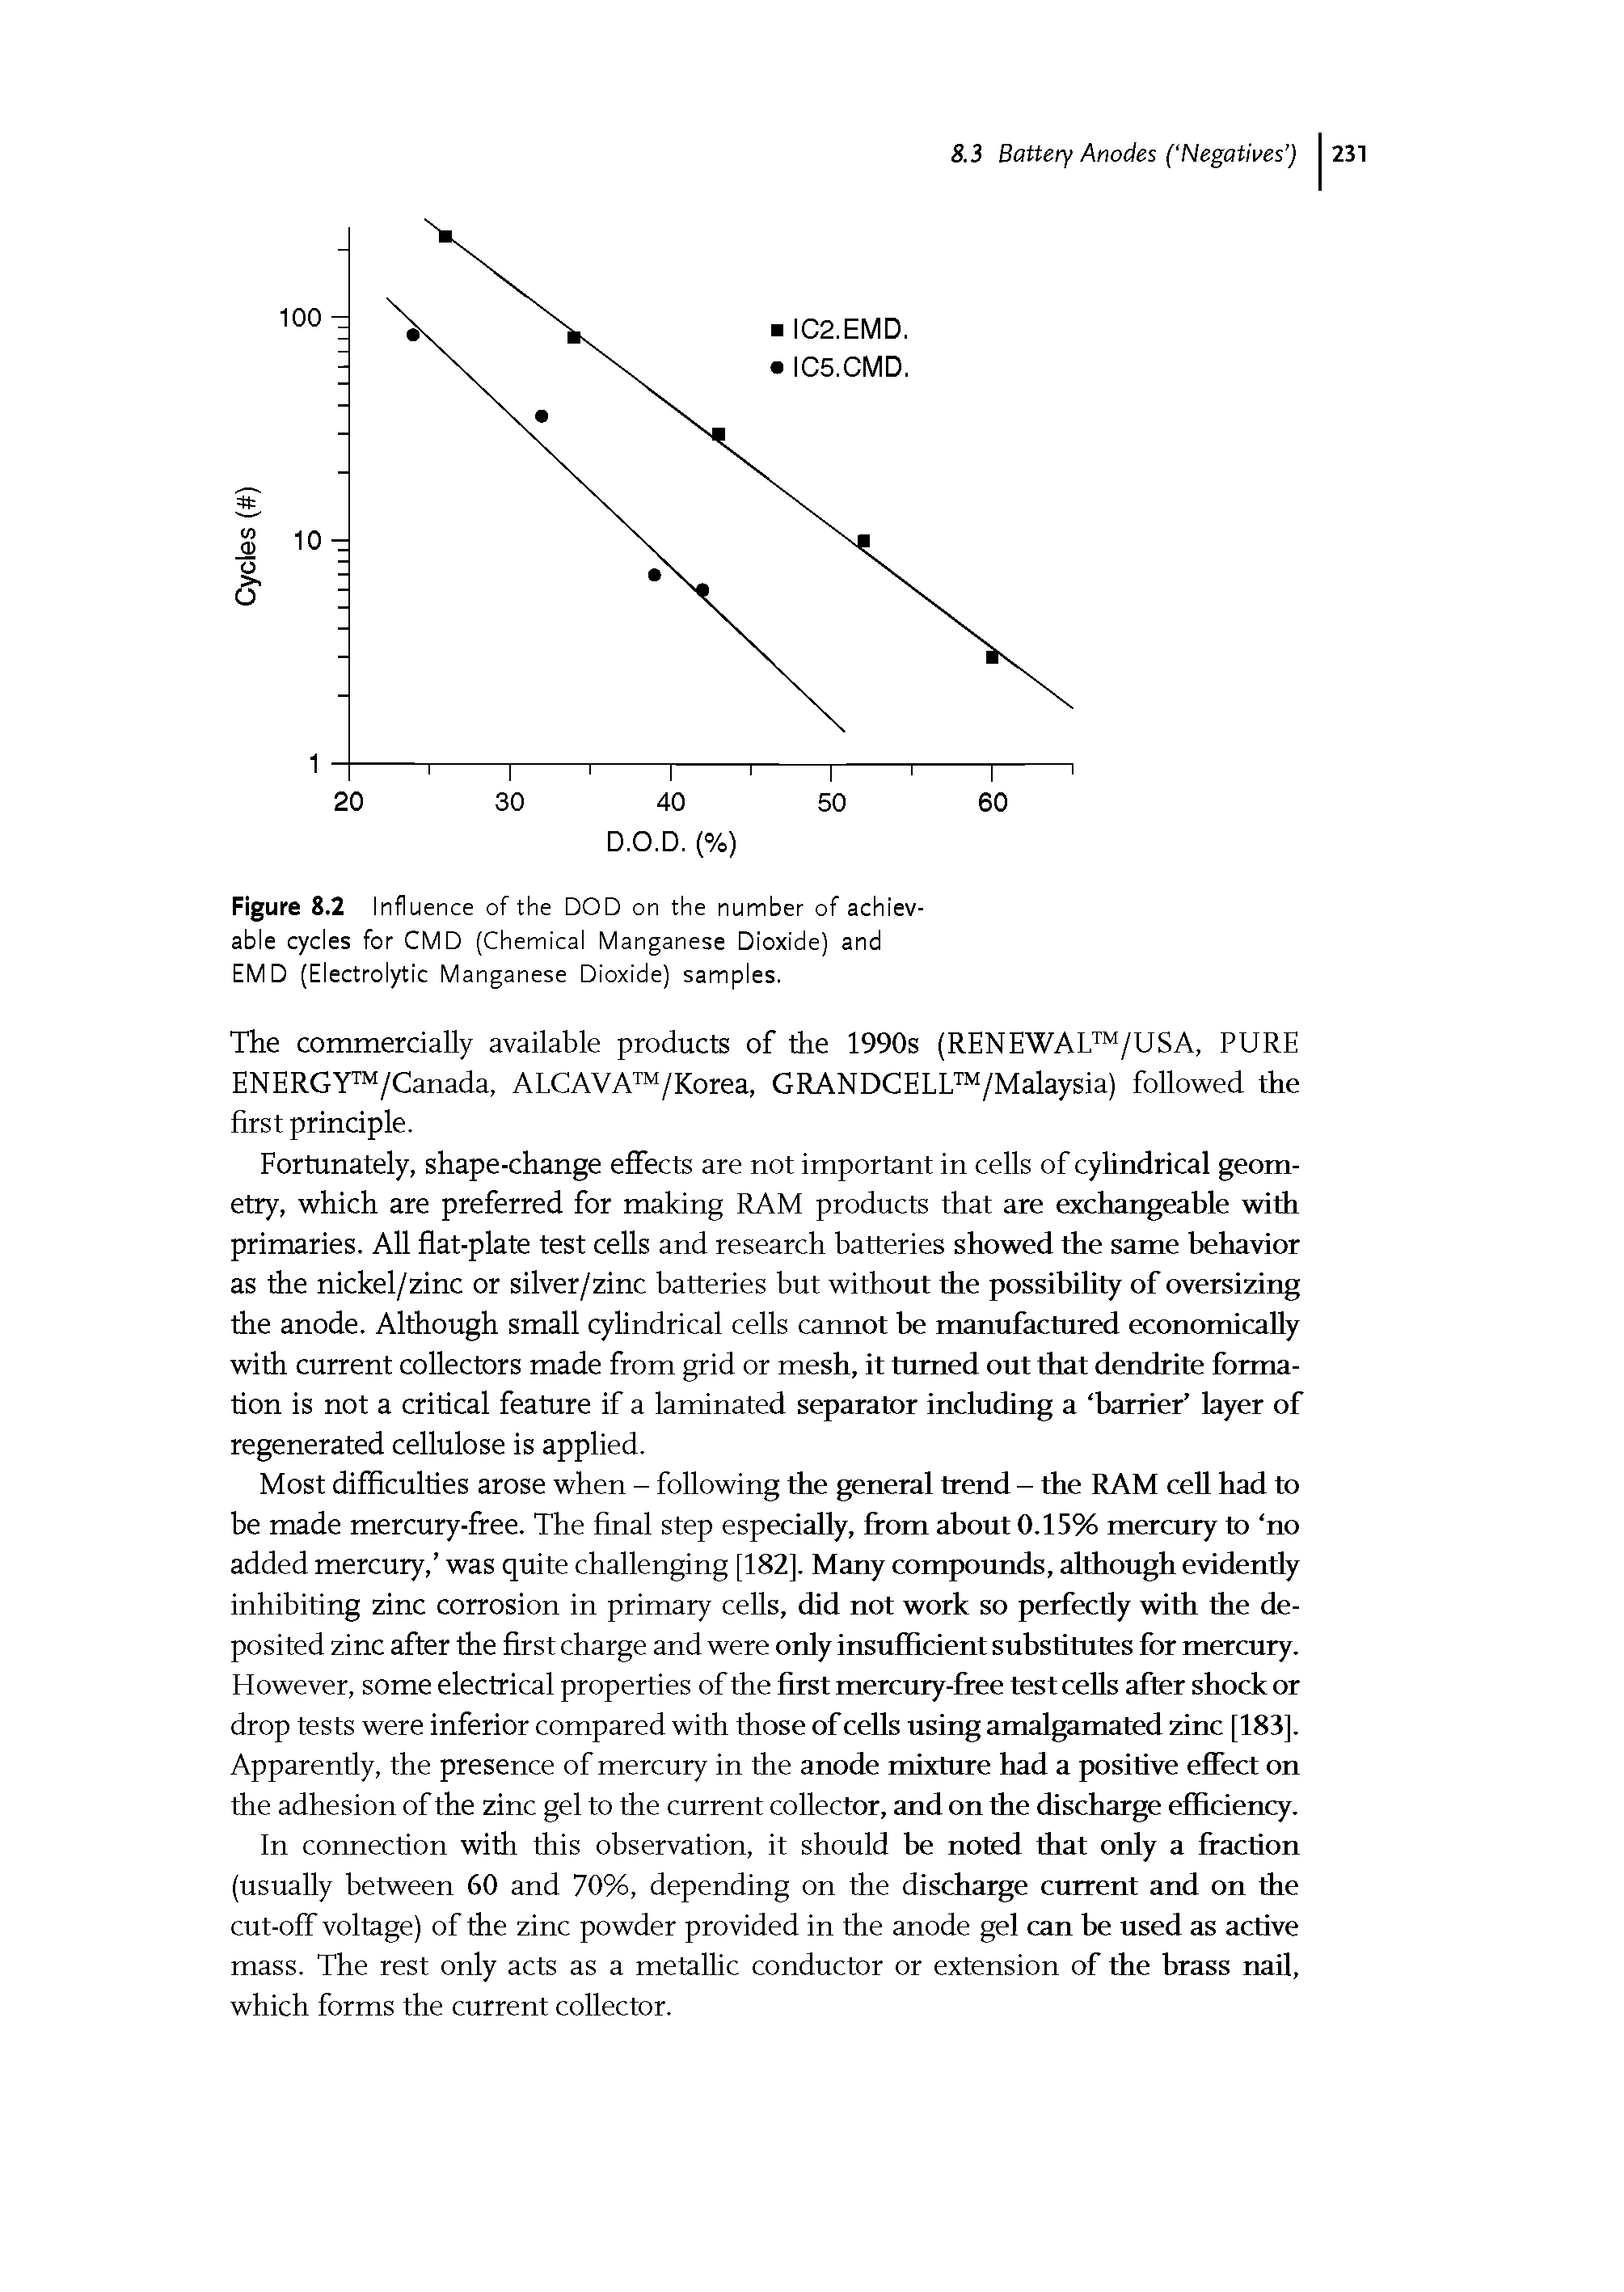 Figure 8.2 Influence of the DOD on the number of achievable cycles for CMD (Chemical Manganese Dioxide) and EMD (Electrolytic Manganese Dioxide) samples.